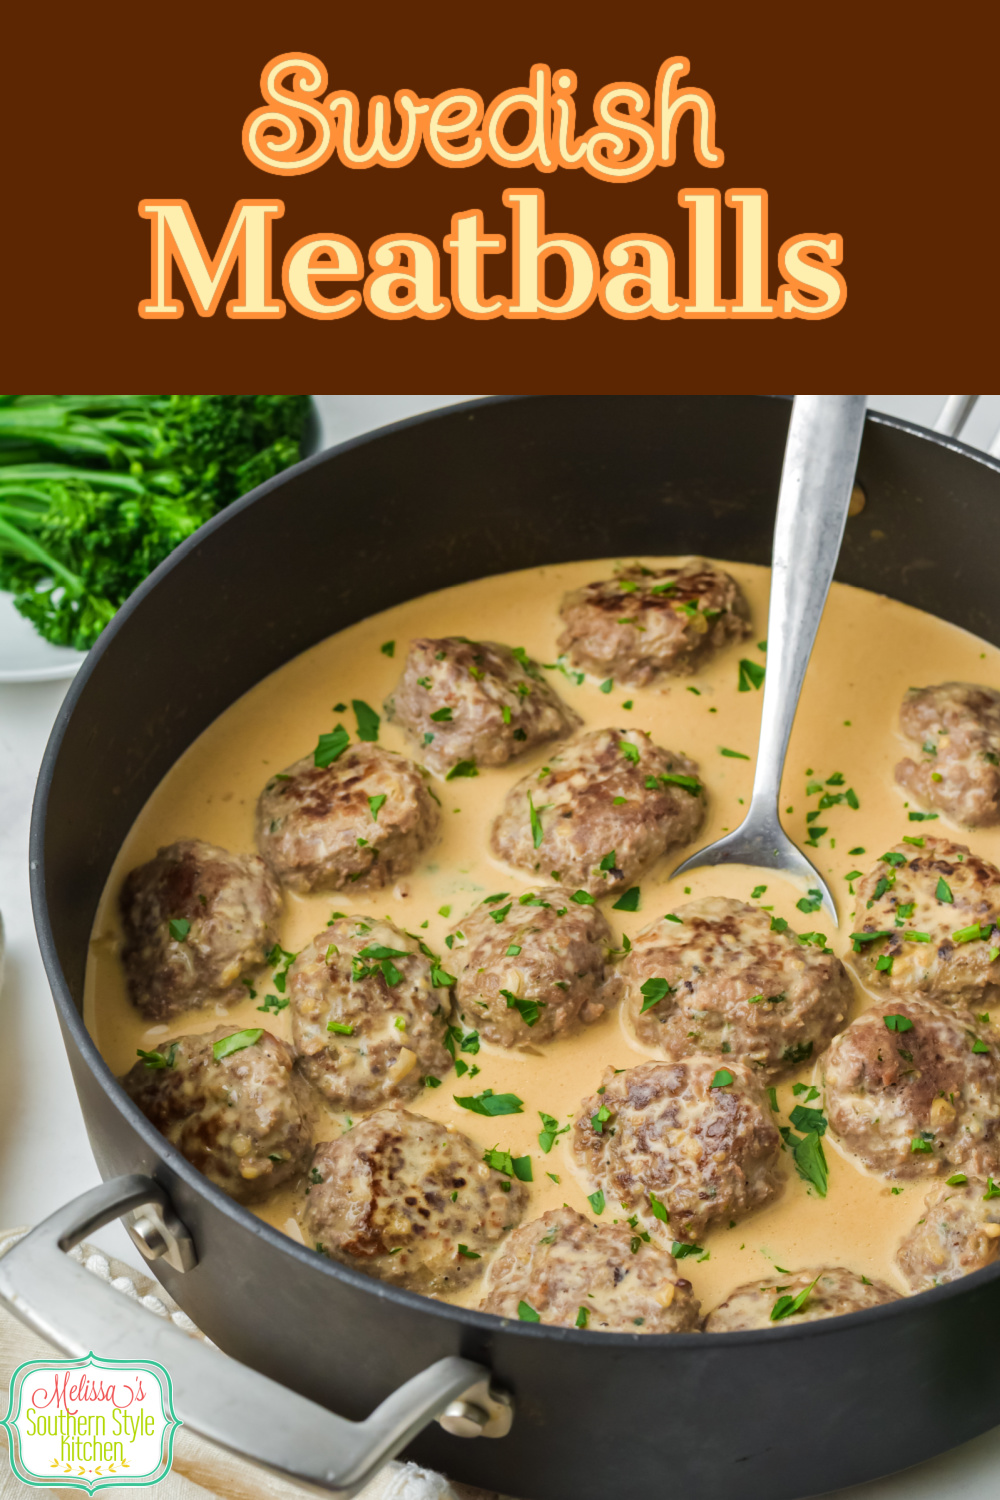 This Swedish Meatballs recipe is full flavored and versatile. It can be served both as an entrée or an appetizer for your small bites menu. #swedishmeatballs #howdoyoumakemeatballs #easymeatballsrecipes #meatballs #swedishfood #turkishmeatballs #meatballrecipes #bestswedishmeatballs via @melissasssk